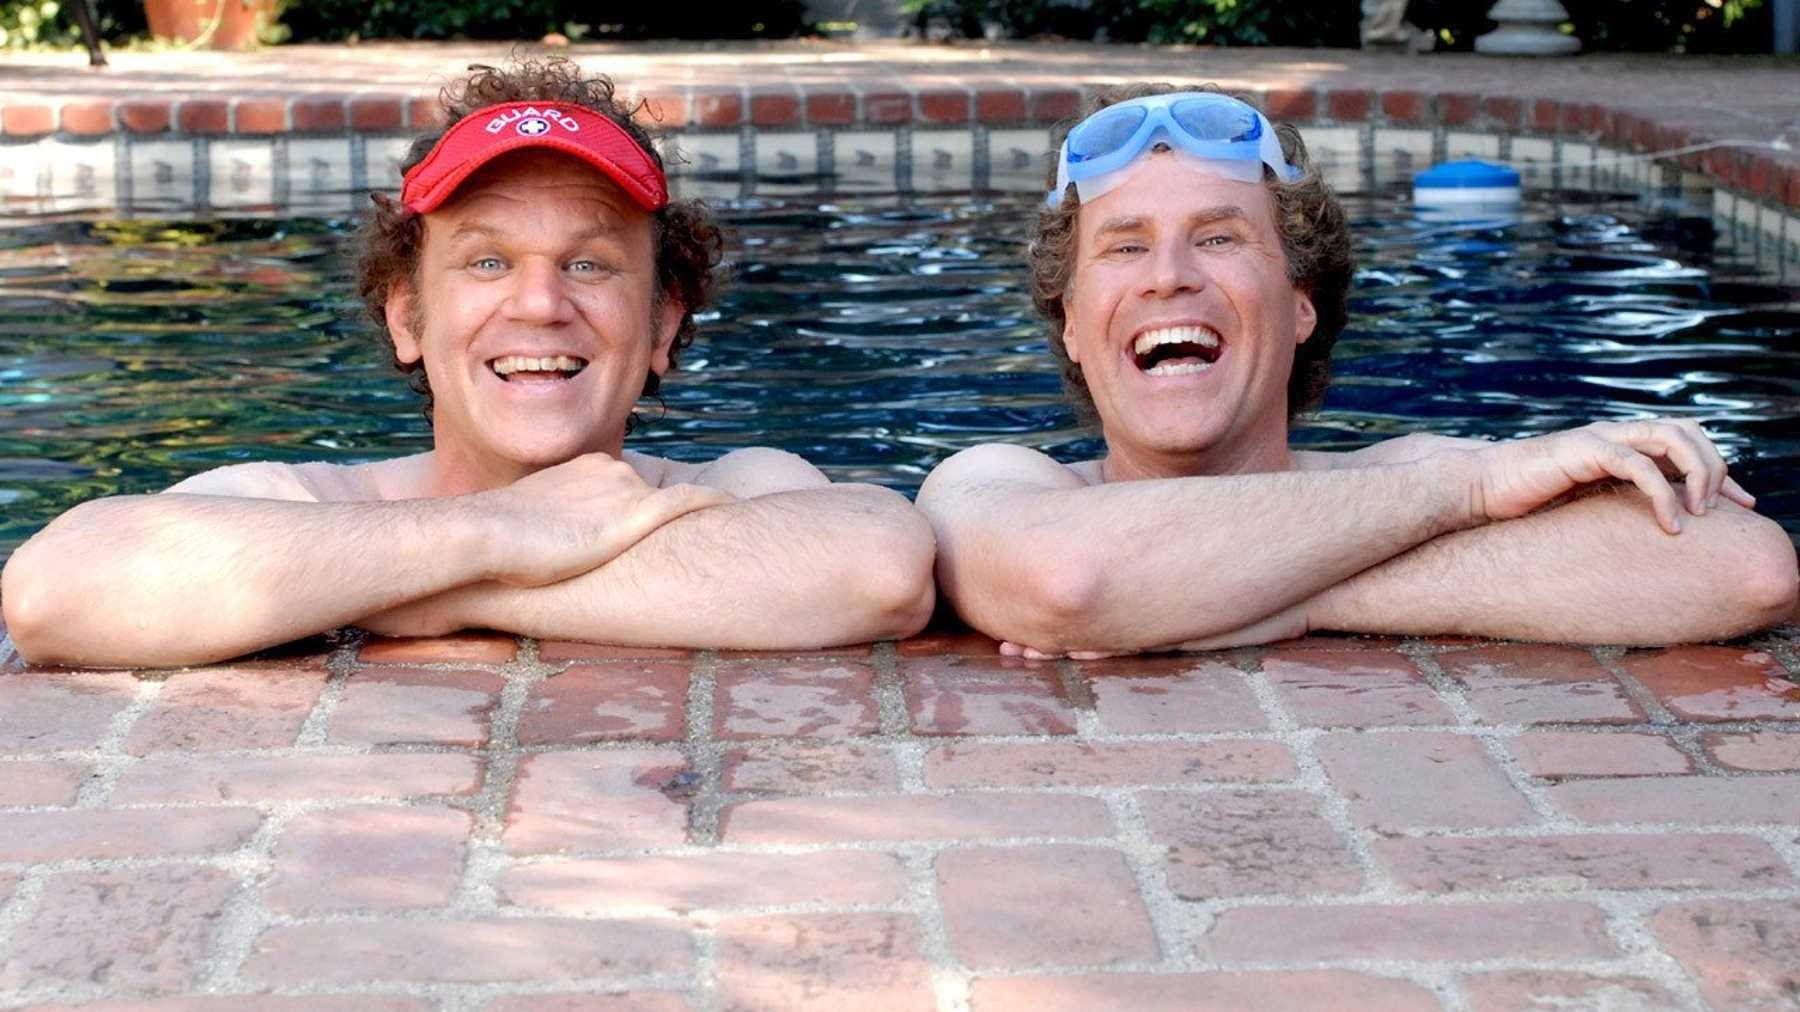 Dale Doback (John C. Reily) and Brennan Huff (Will Ferrell) leaning against the side of a pool